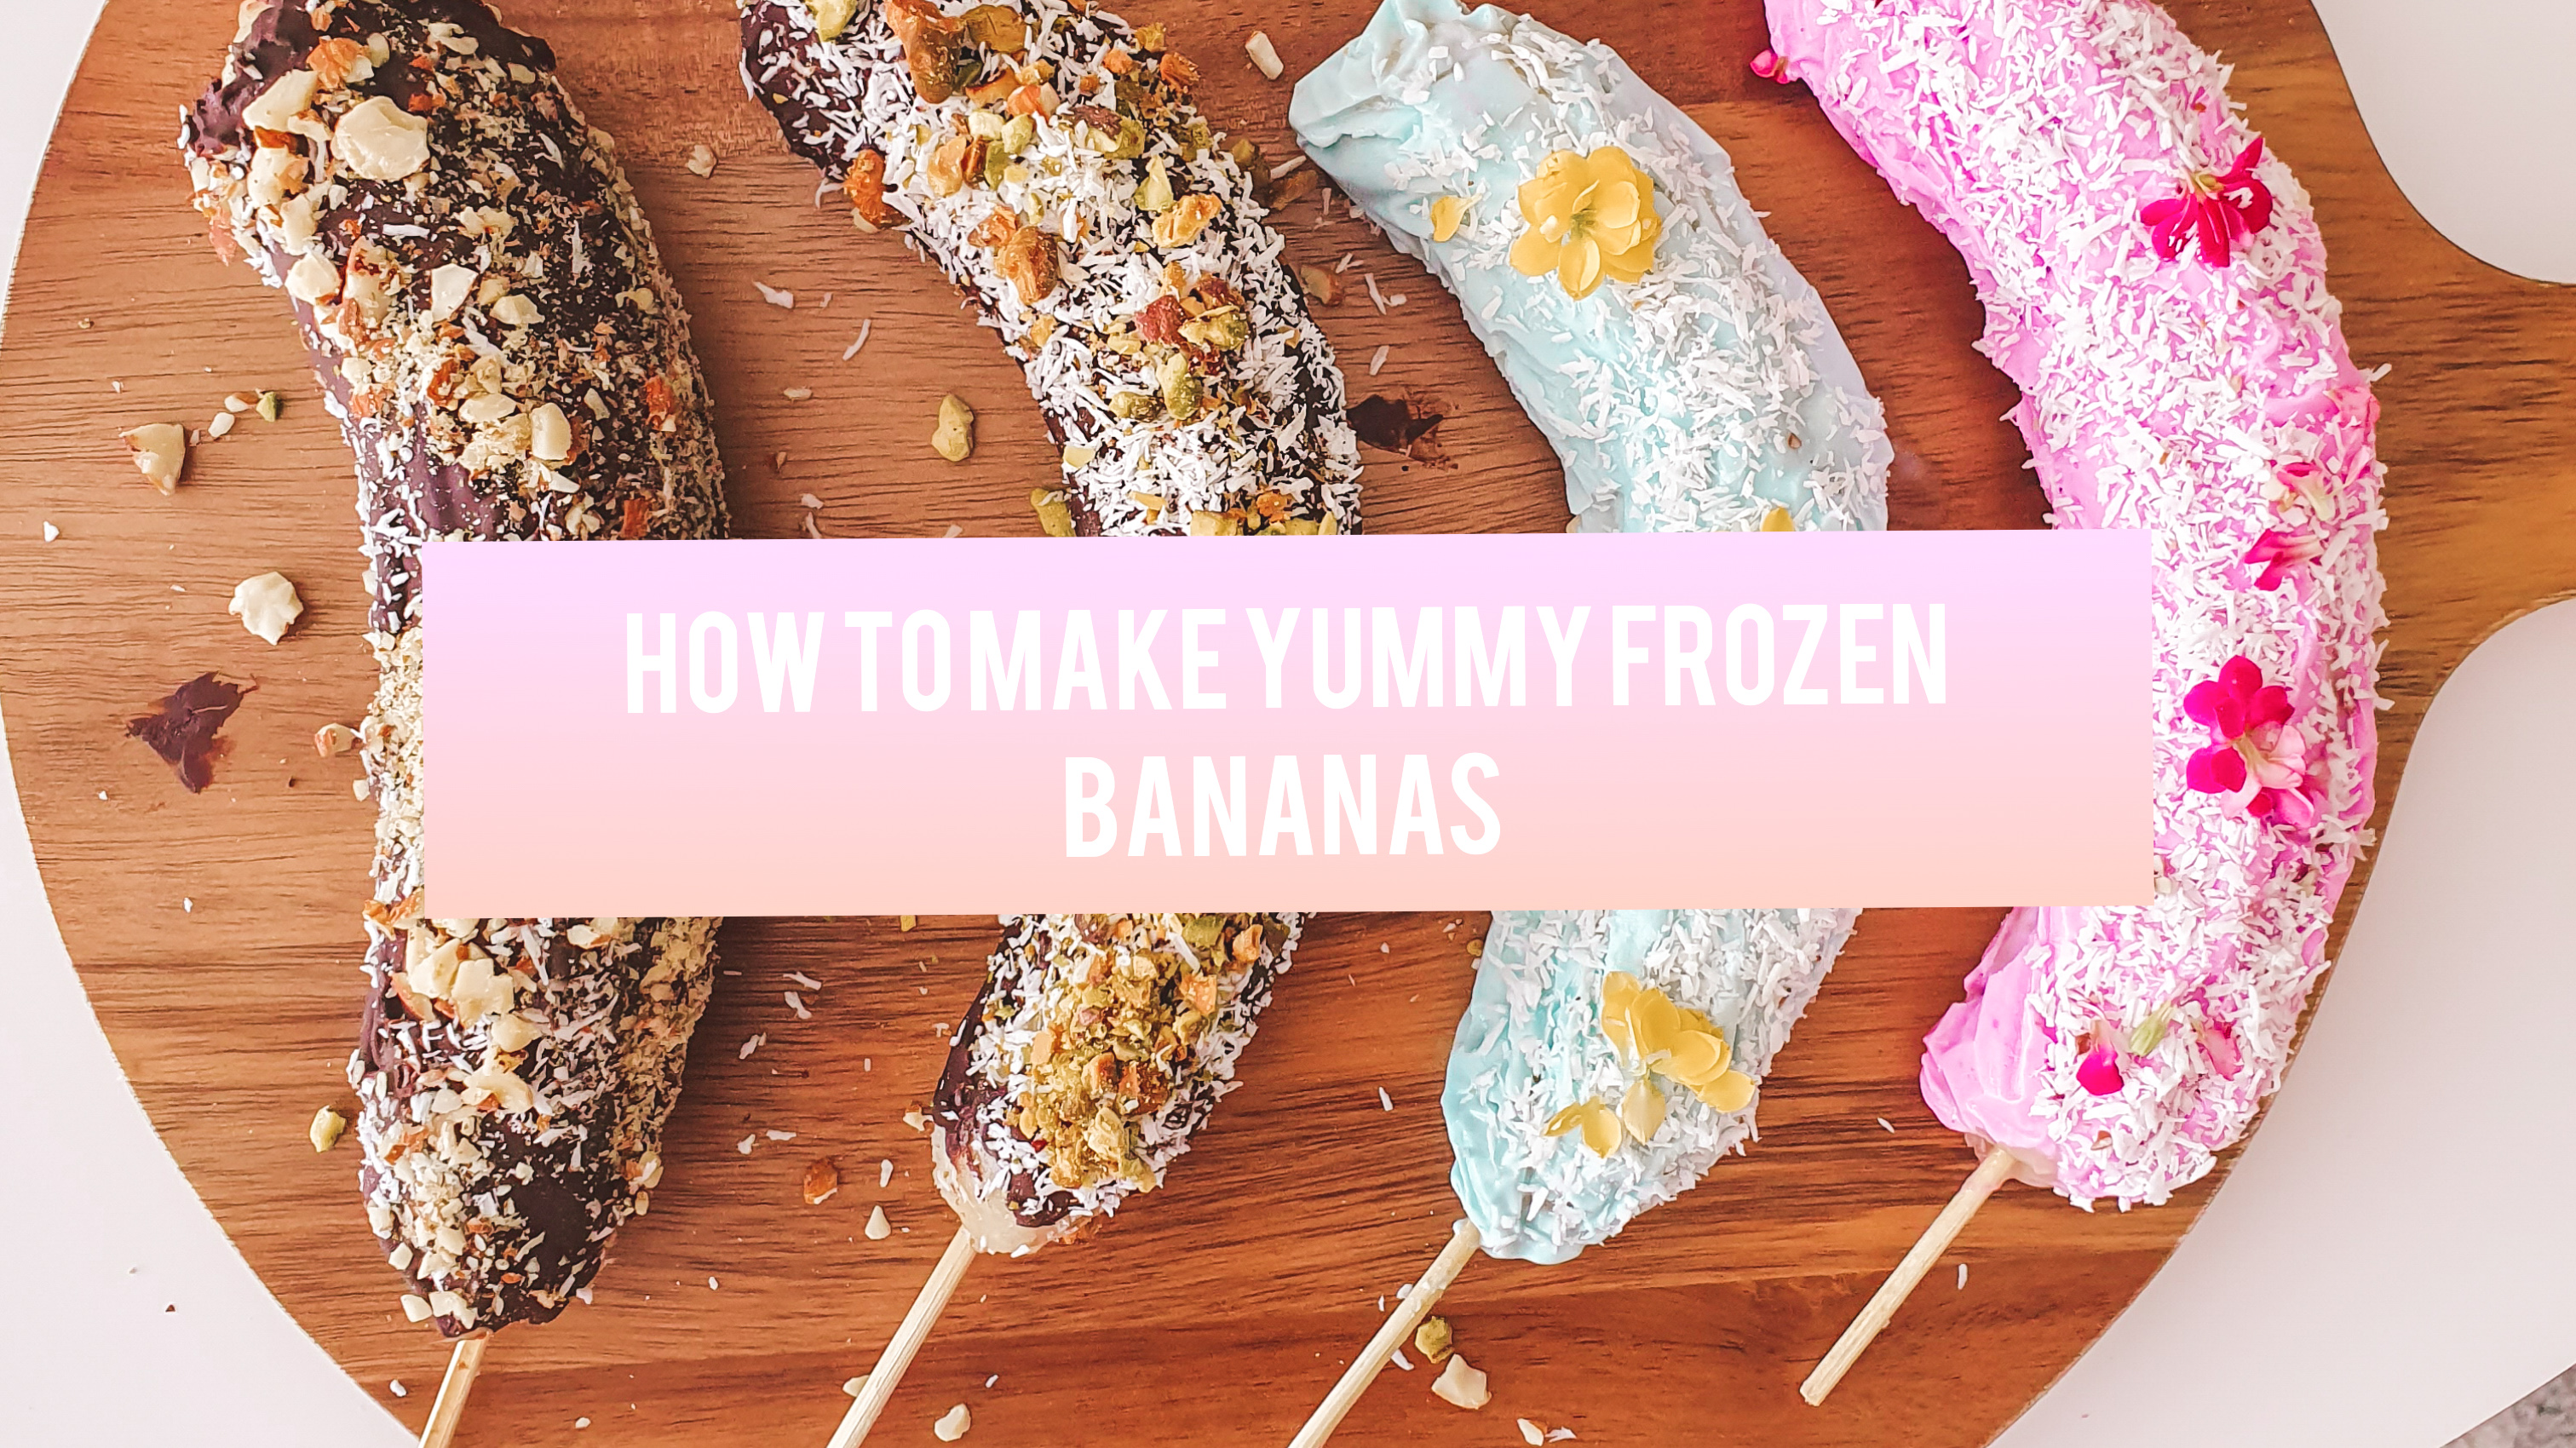 How To Make Yummy Instagrammable Frozen Banana Dessert The Mommy Couture